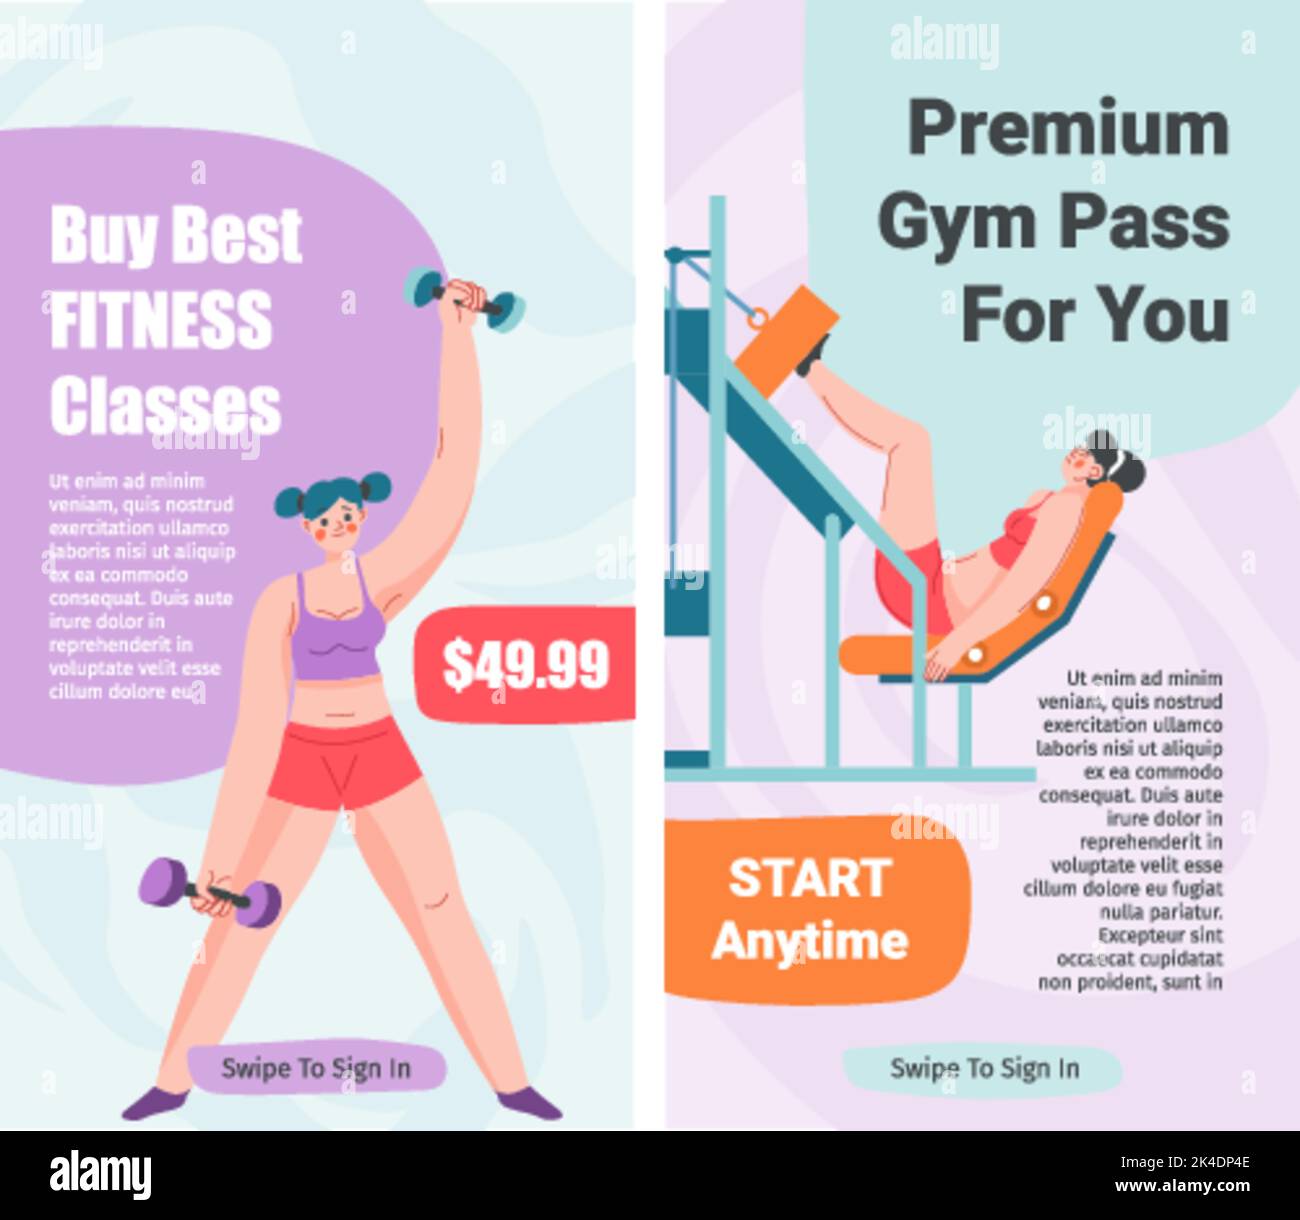 Premium gym pass for you, buy fitness classes Stock Vector